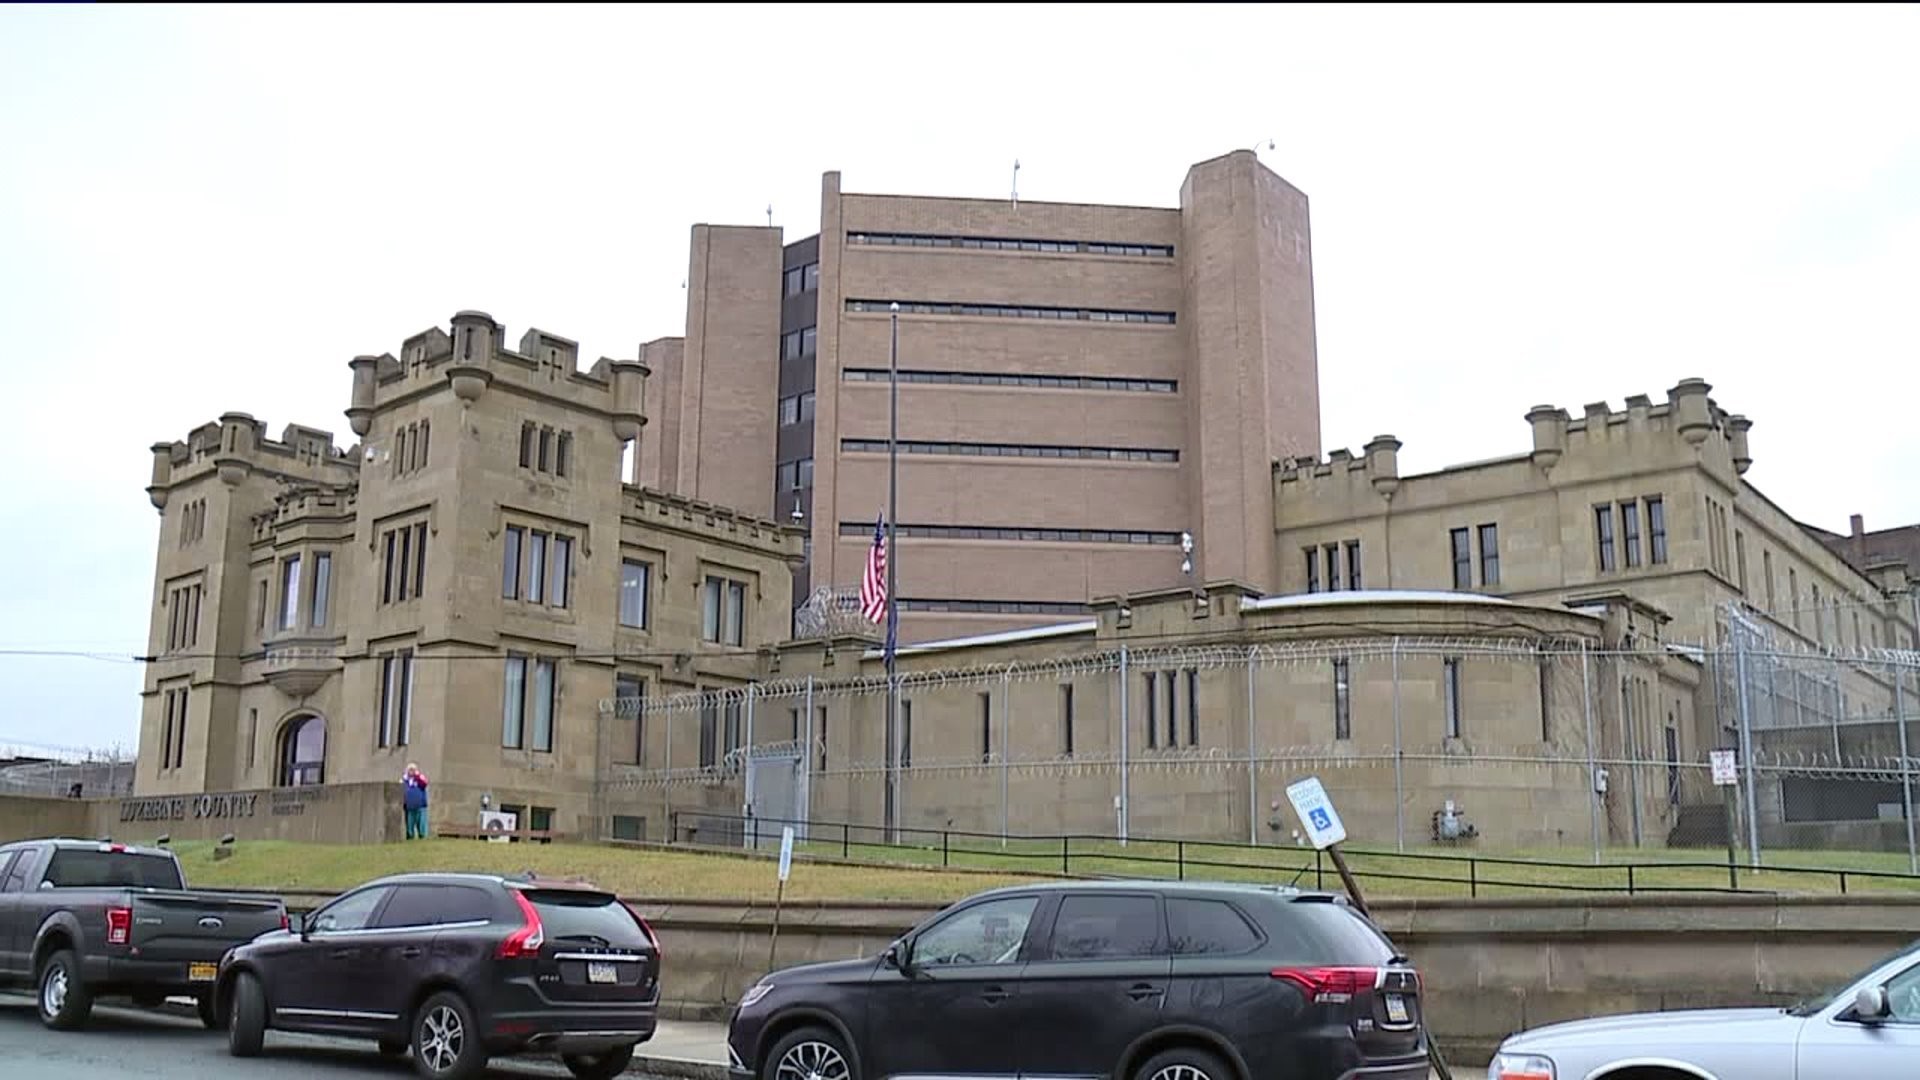 Shaheen Mackey was being held at the Luzerne County Correctional Facility when he became involved in a scuffle with officers; he later died at a  hospital.